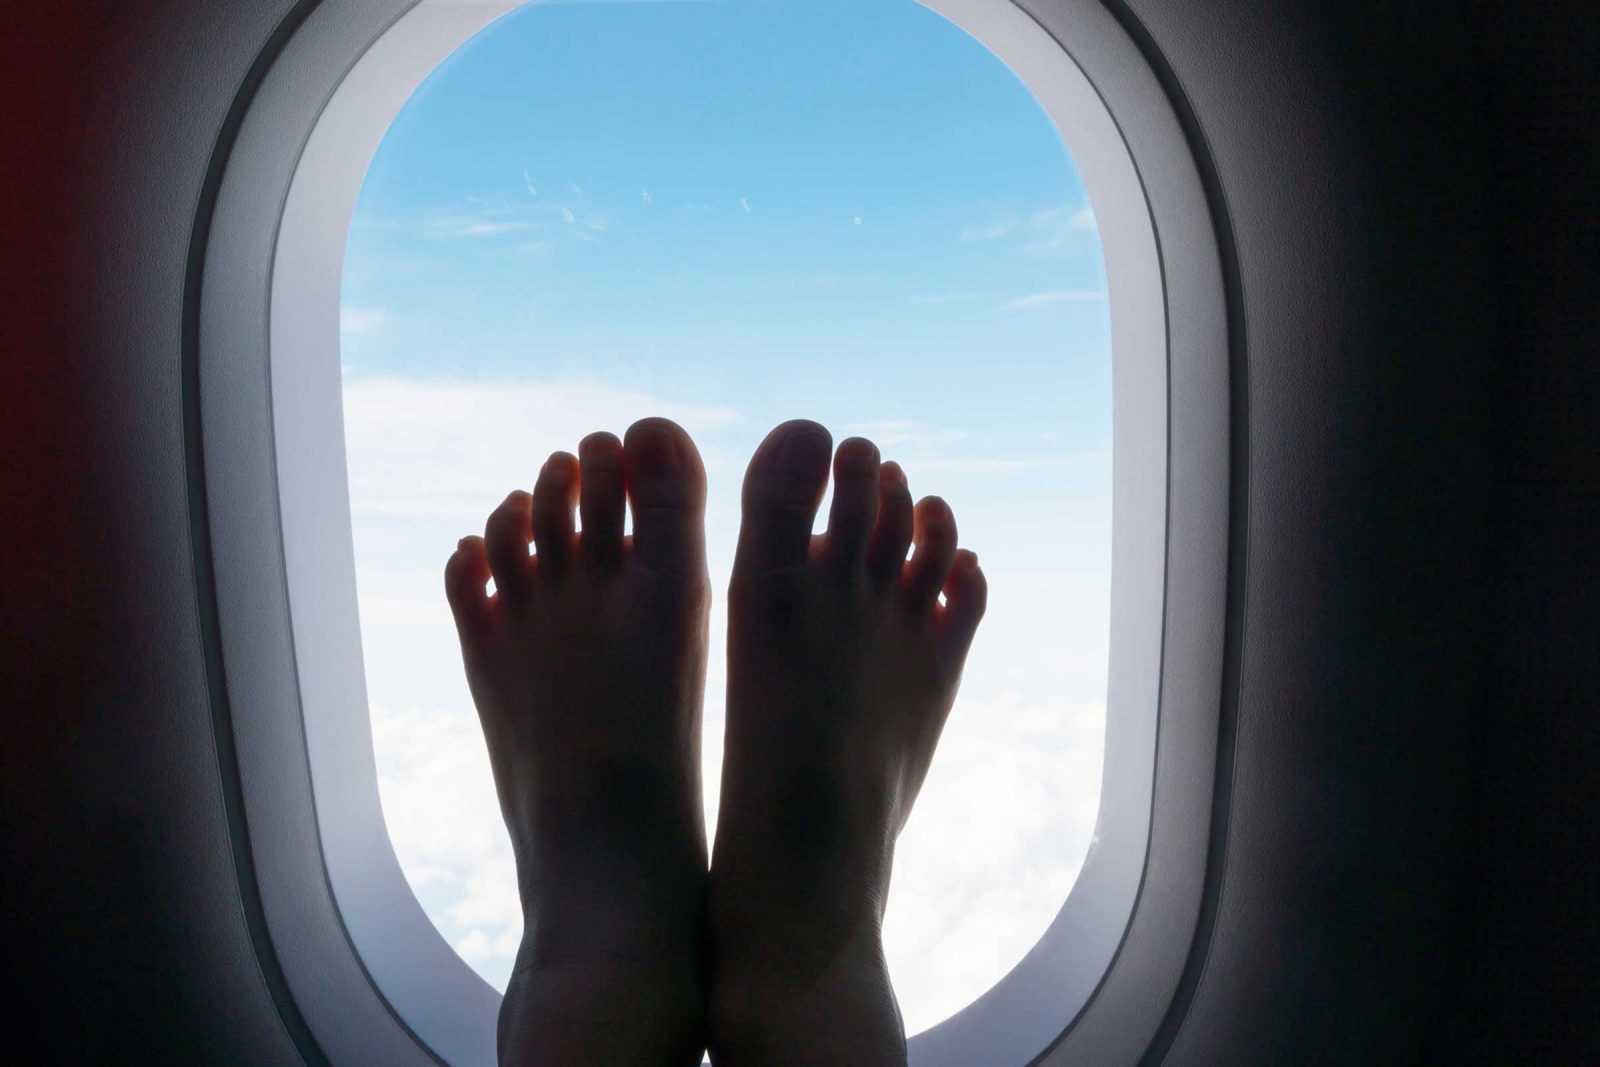 Flight attendants wish that passengers stop doing these things on-board